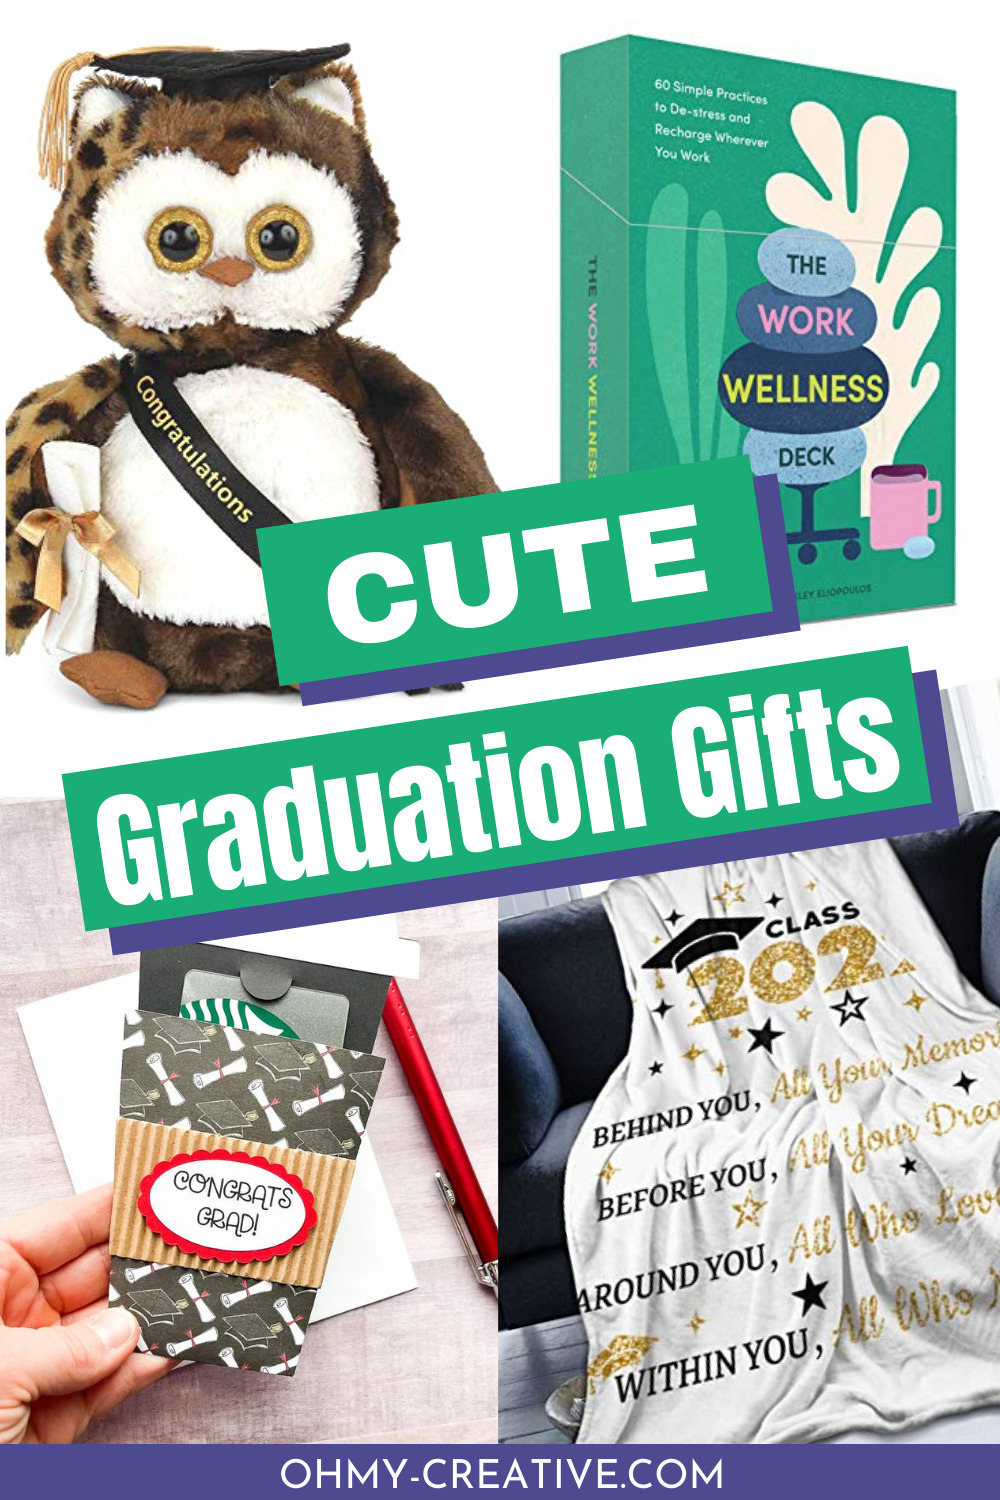 This collage of cute graduation gifts share cute grad gifts for both girls and guys.